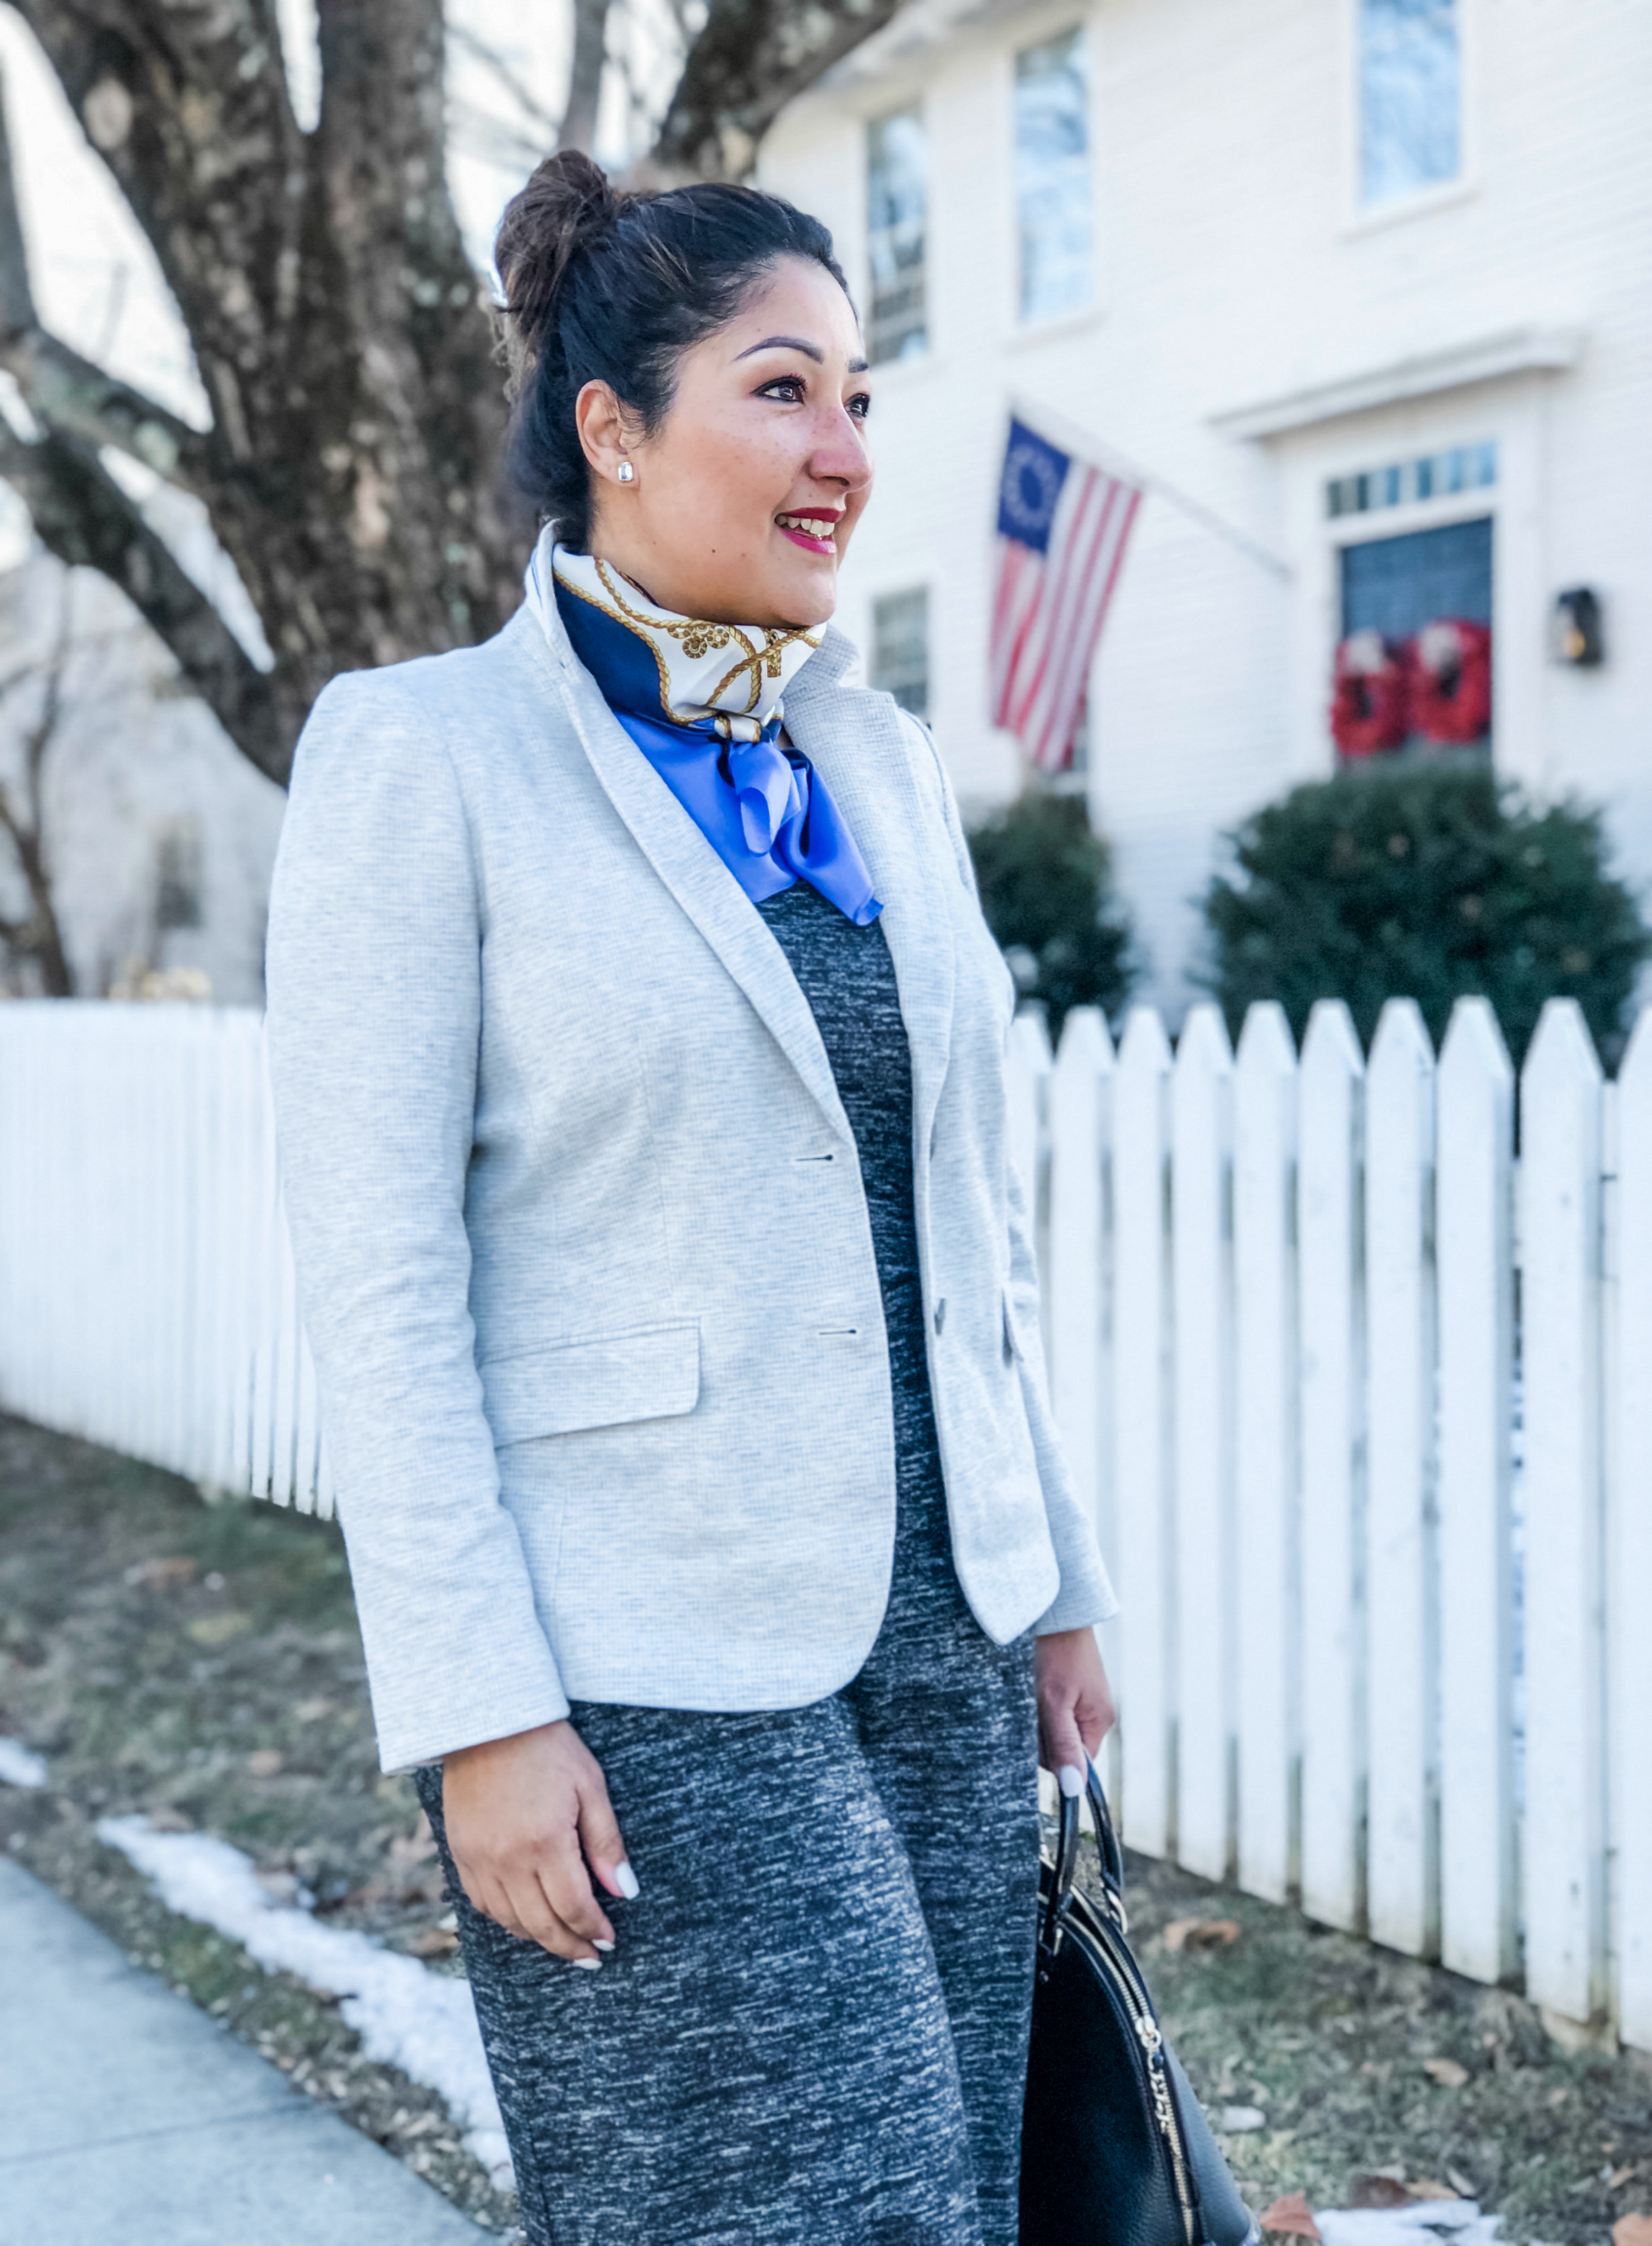 Dress For Success with Talbots and O, The Oprah Magazine capsule collection 2019.